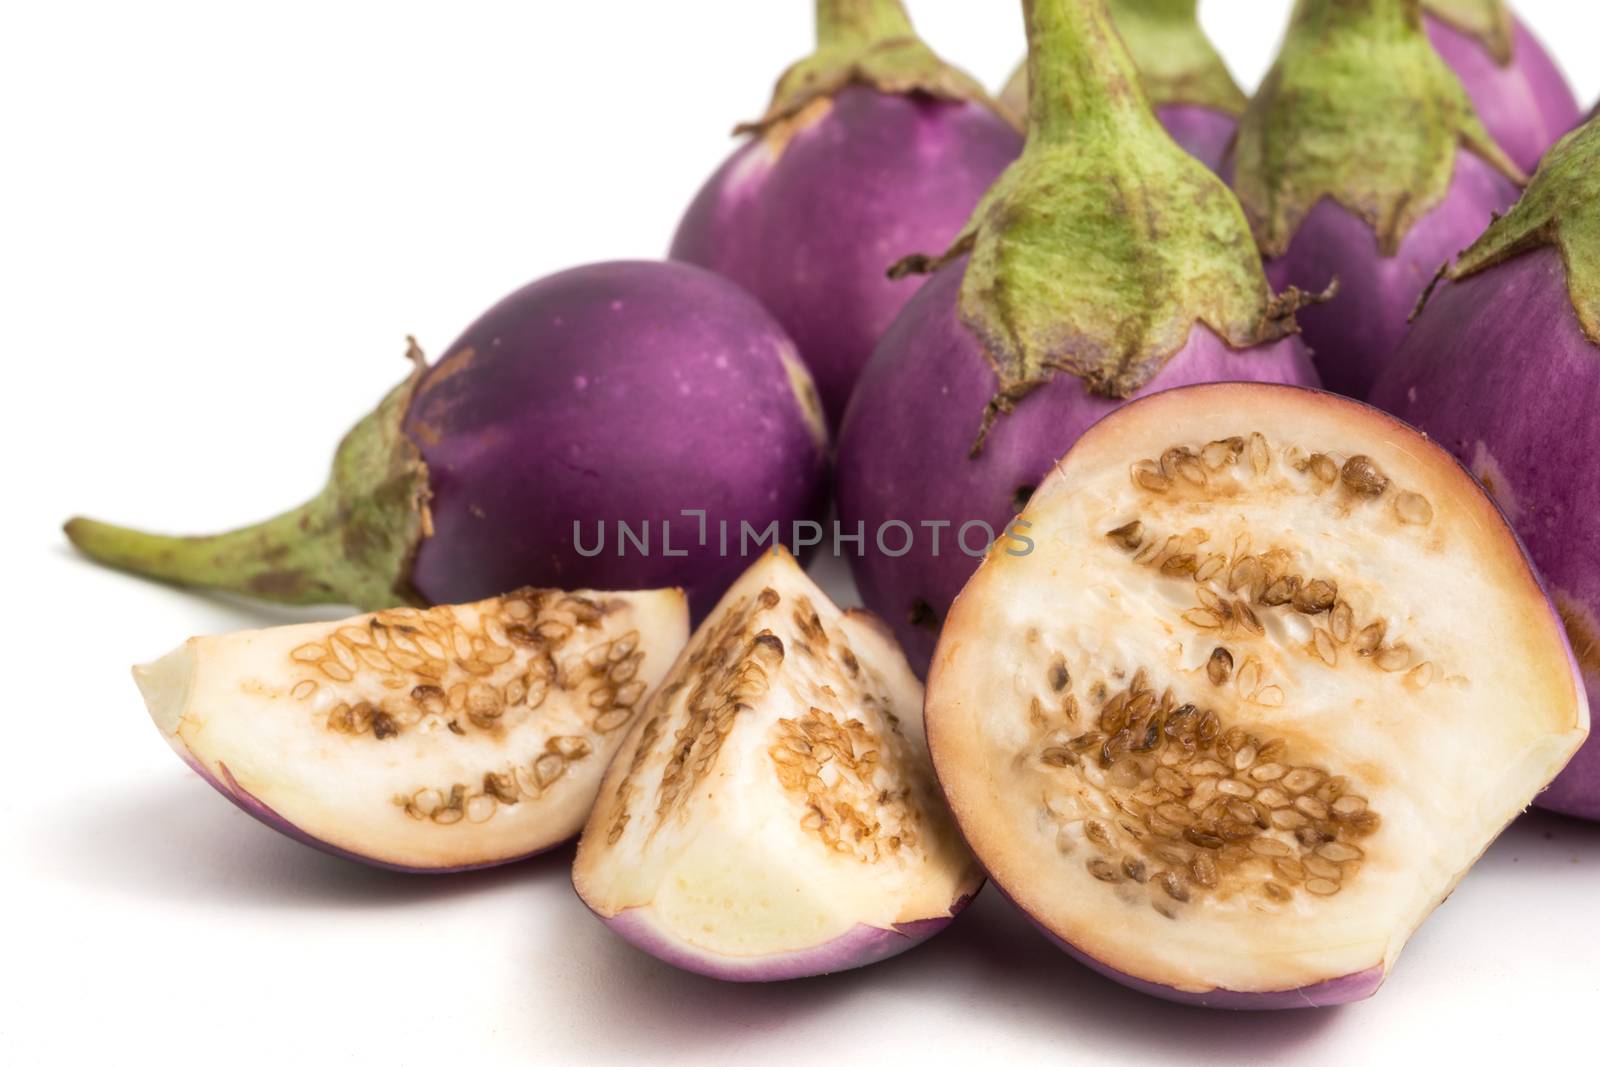 Fresh Purple eggplants on white background. by ronnarong